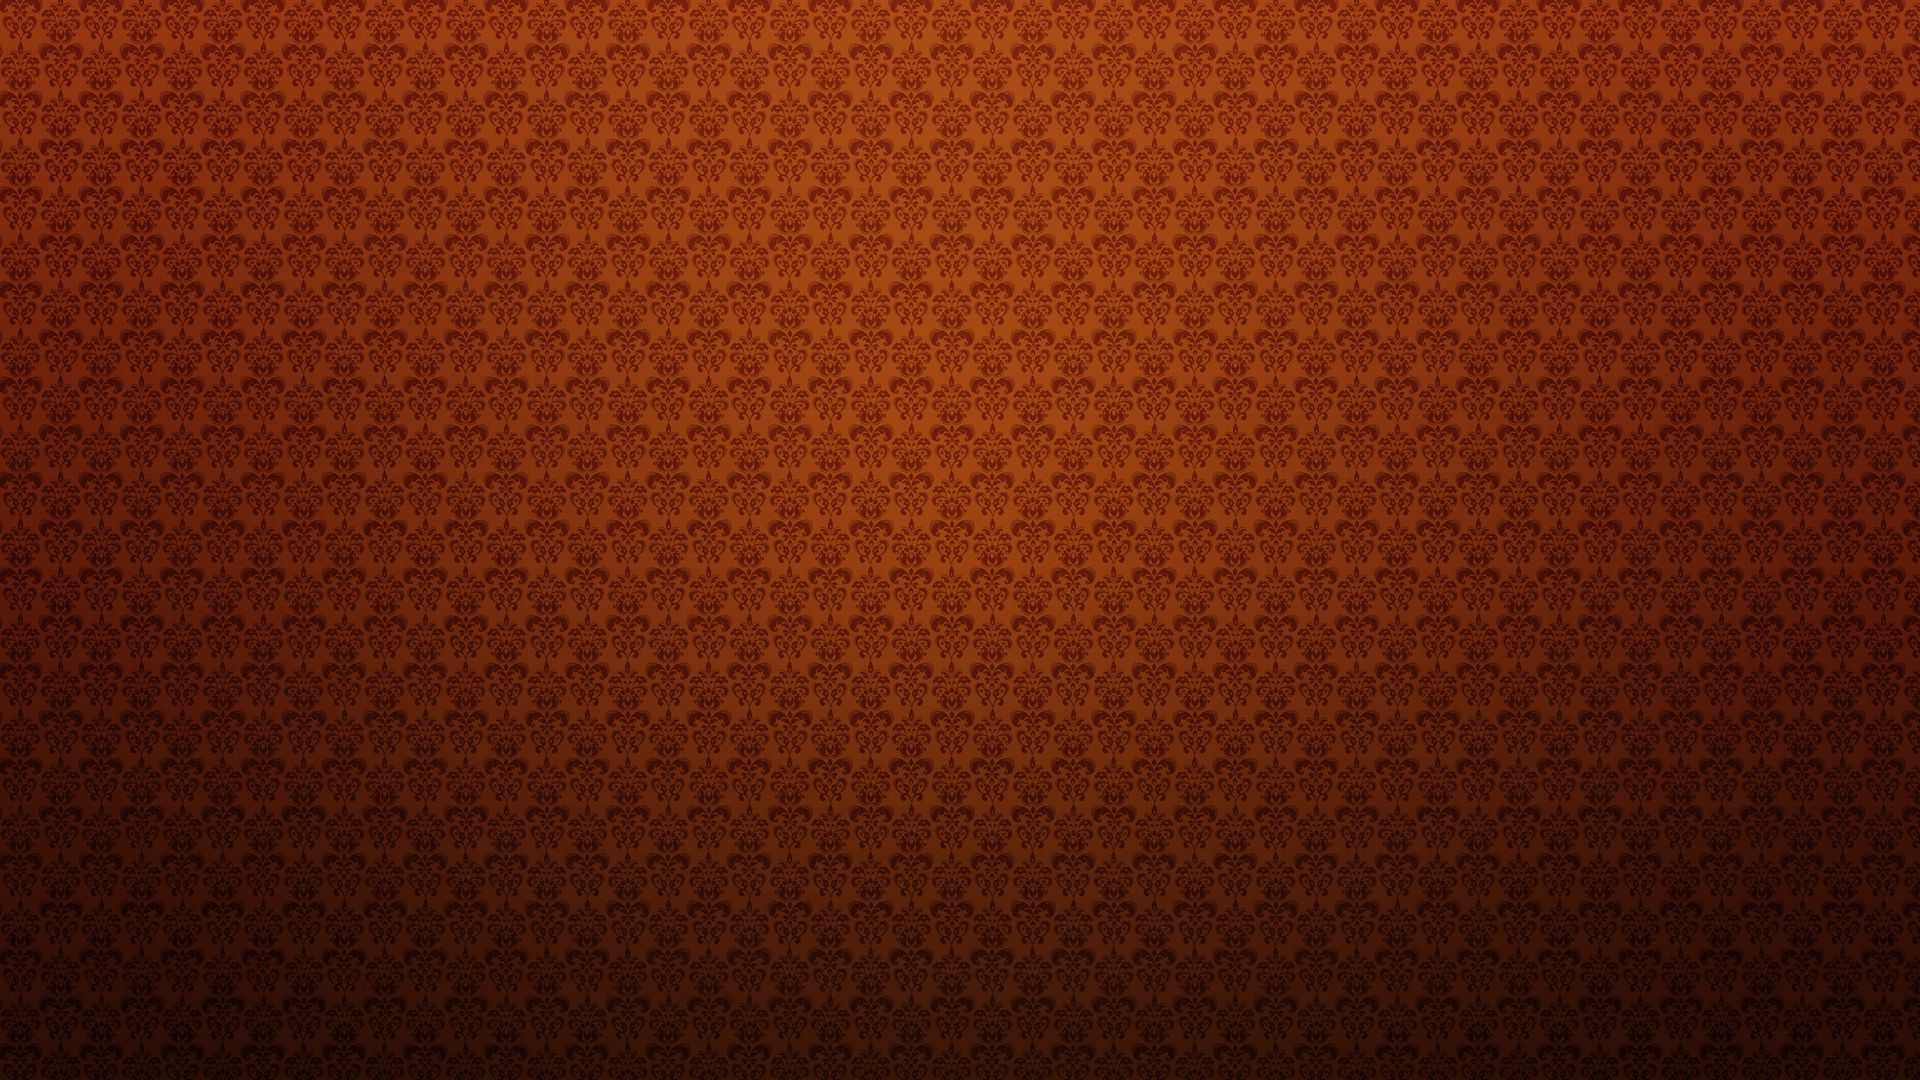 Download wallpaper 1920x1080 patterns, light, colorful, texture ...